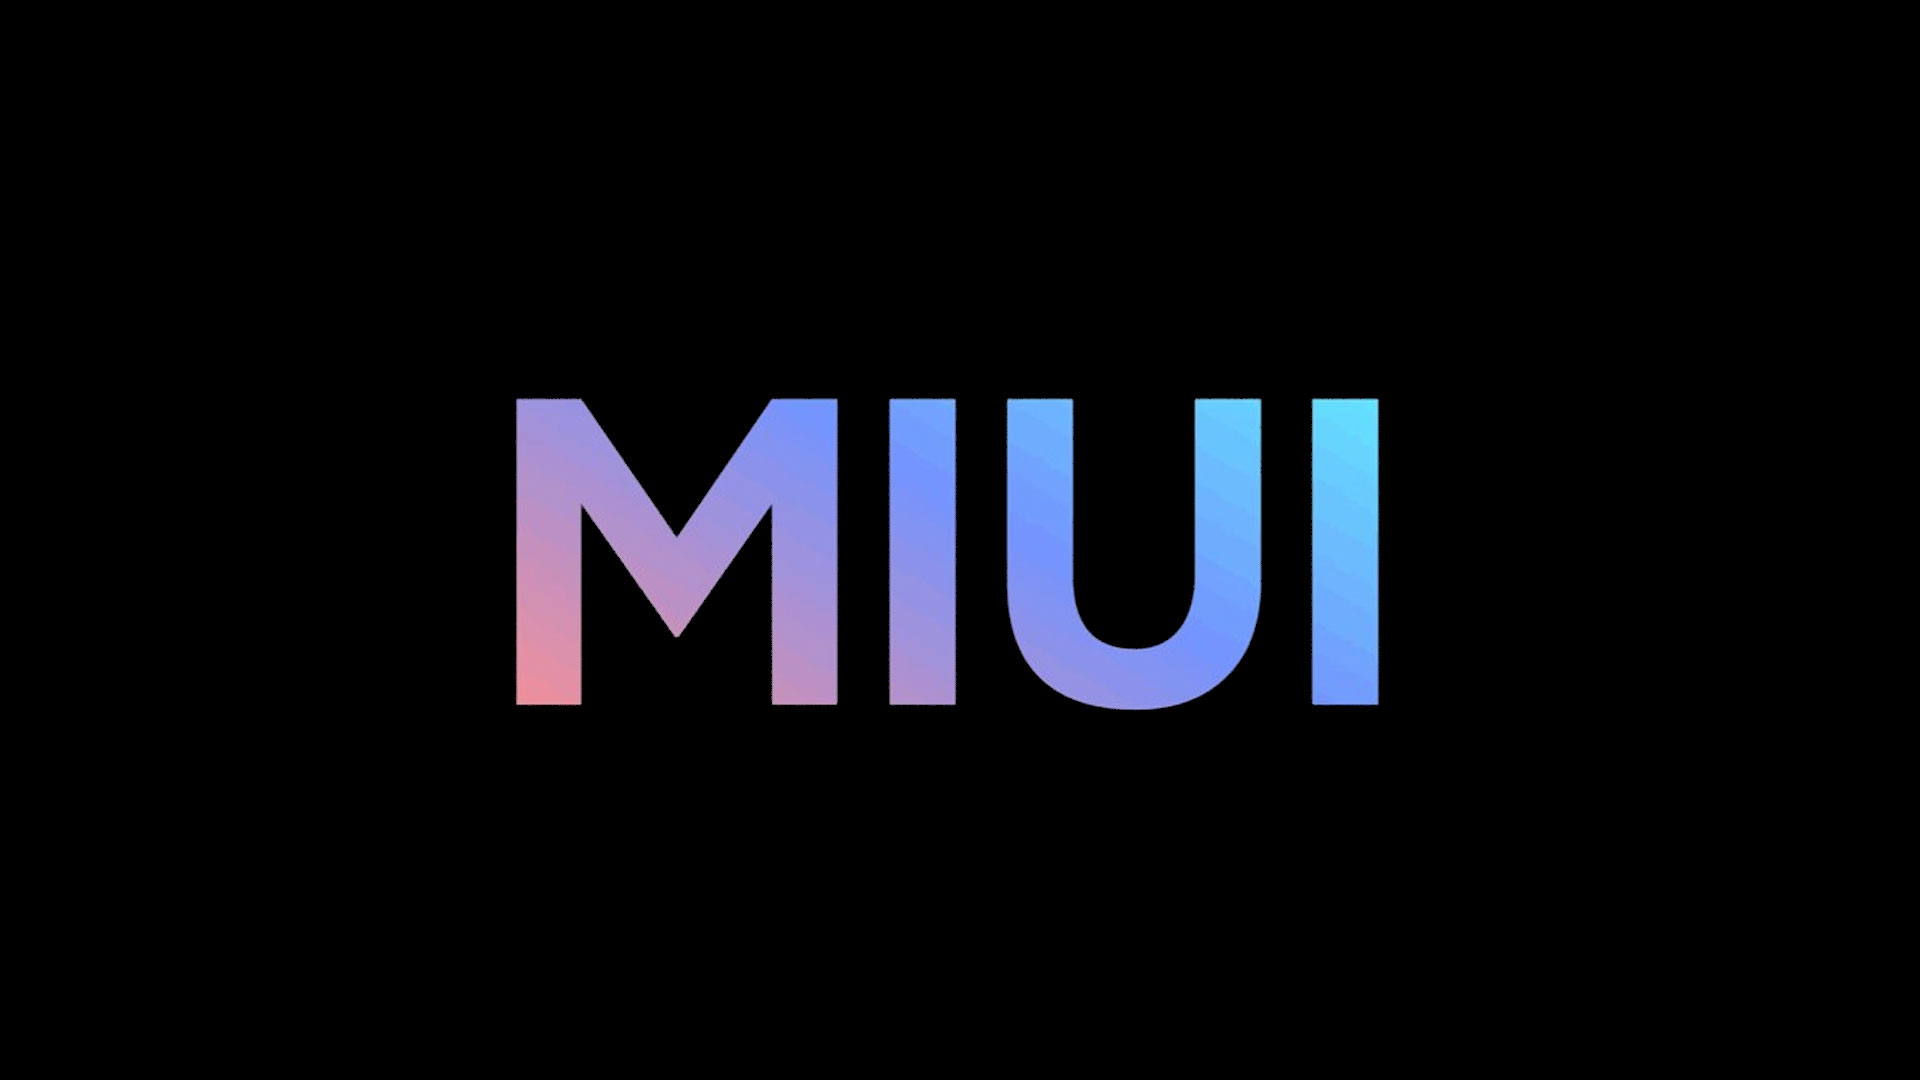 Xiaomi says goodbye to MIUI in a video, this is how the system has evolved over the years